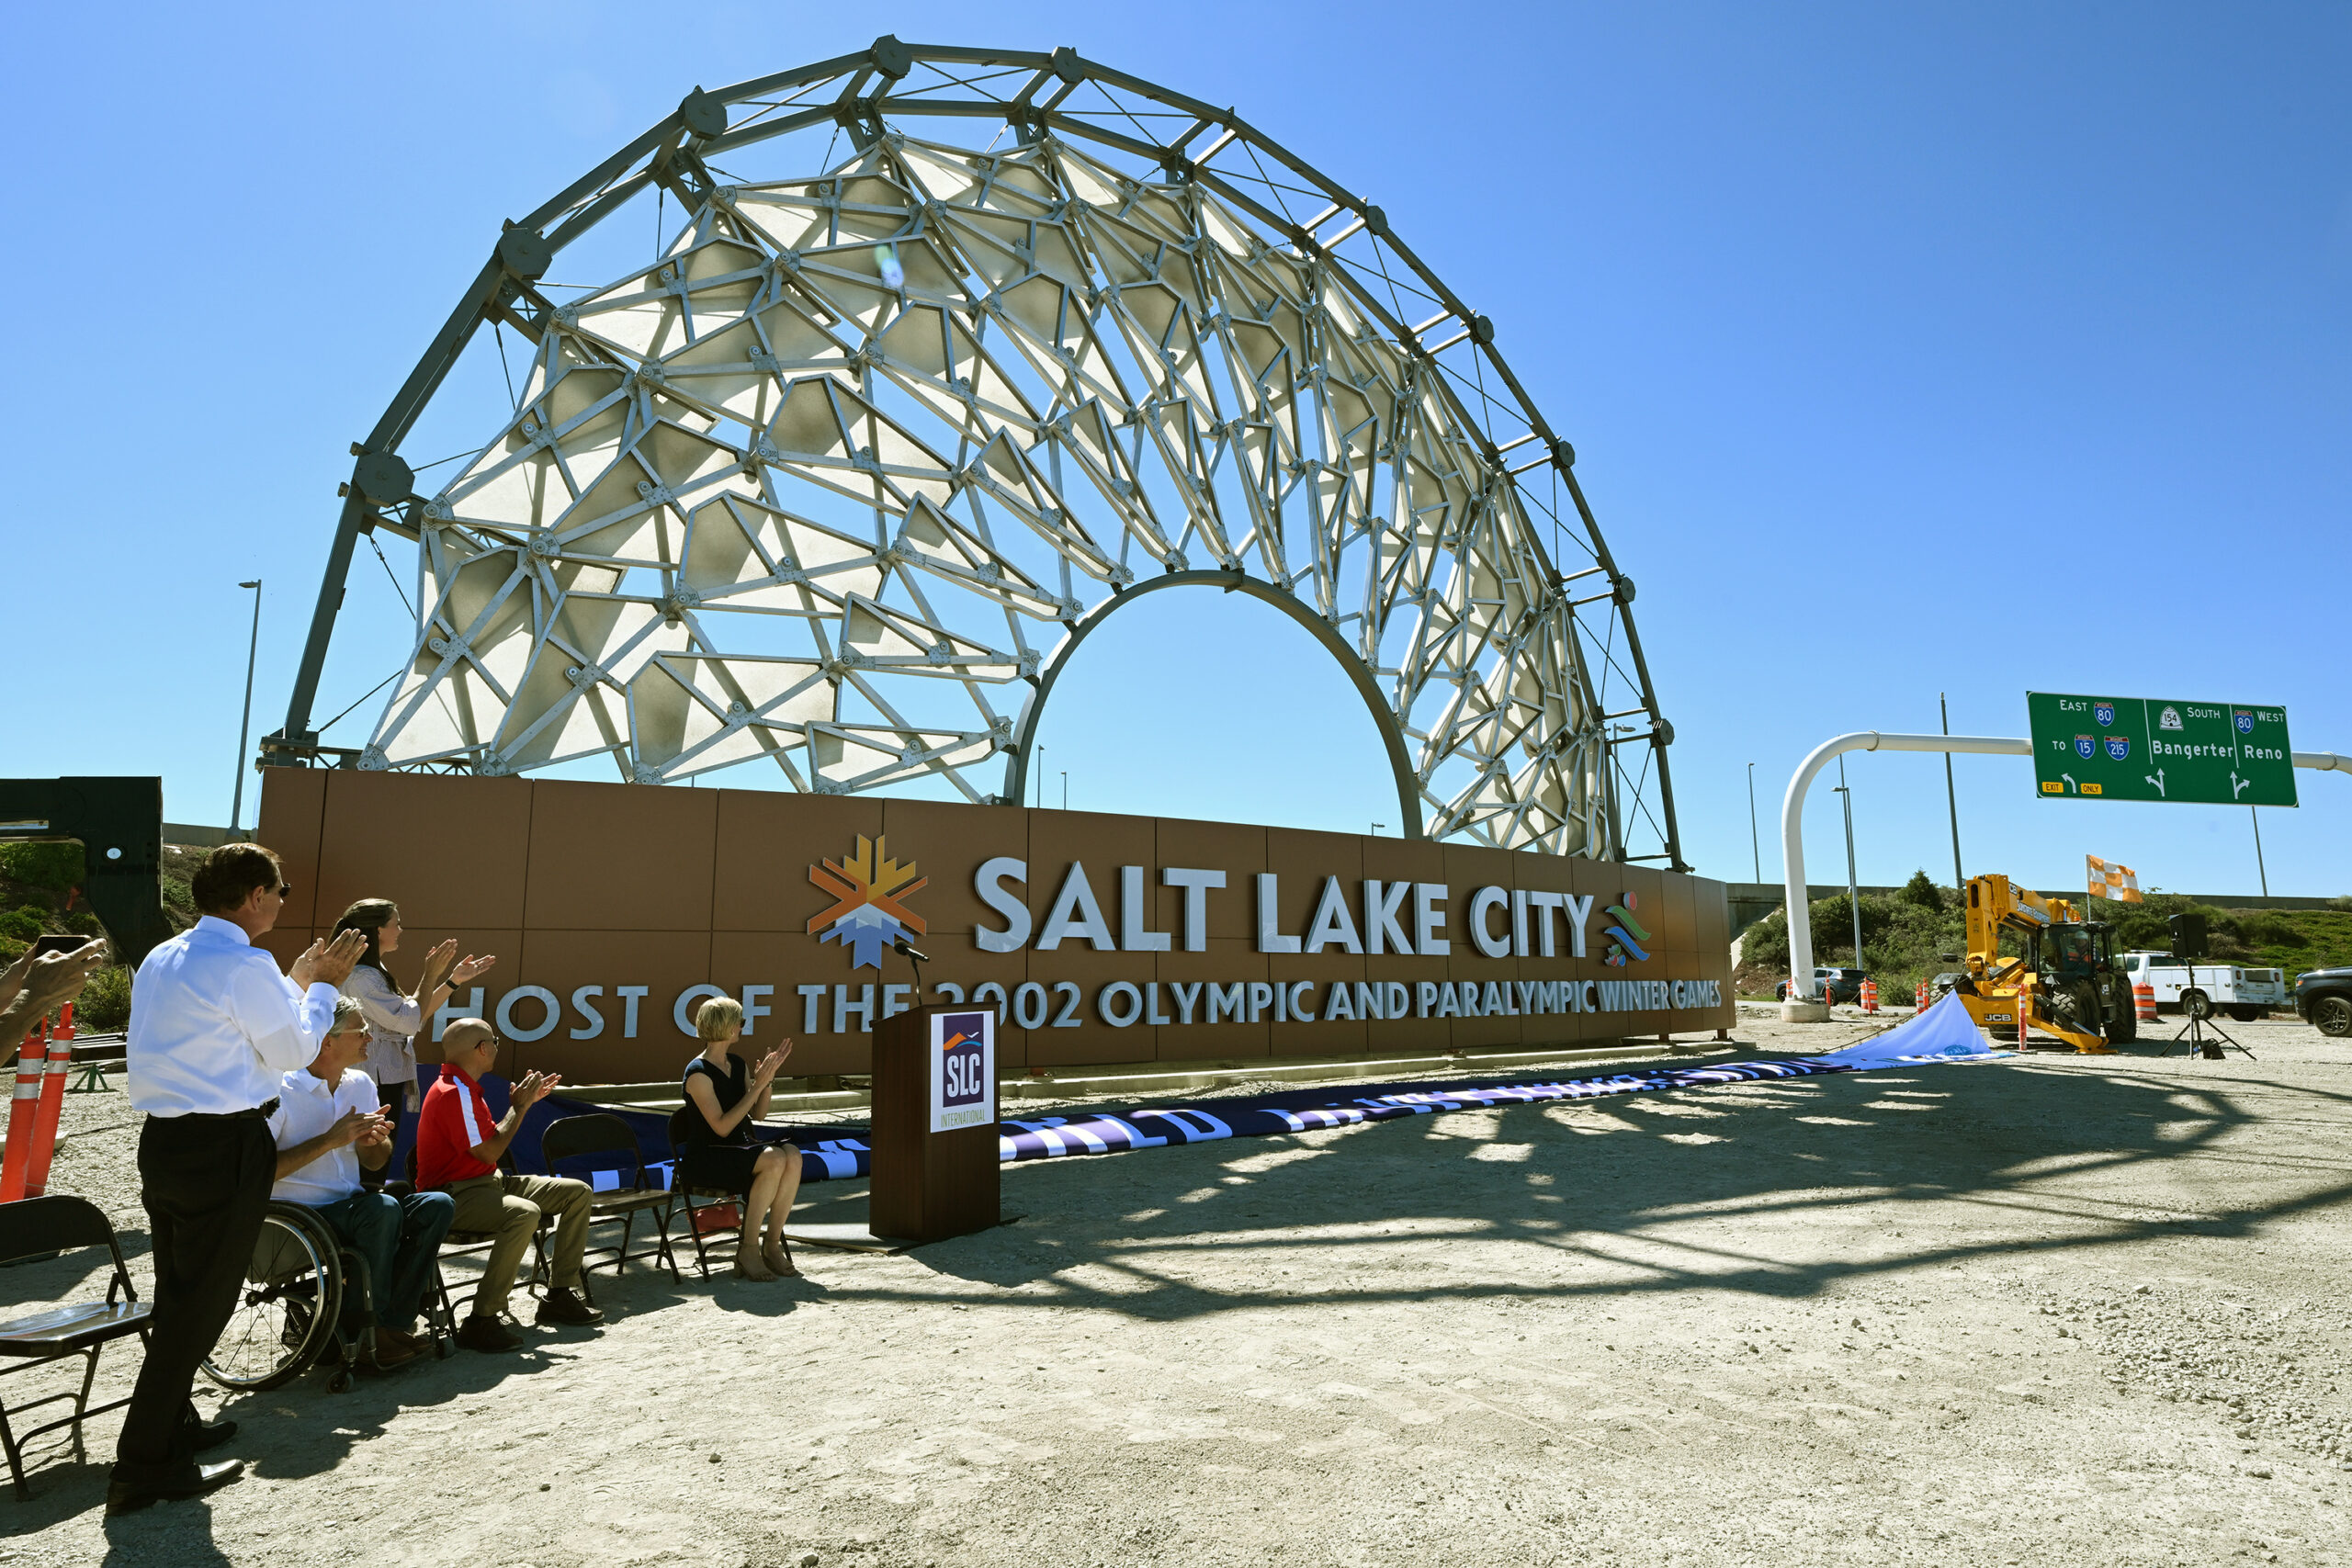 The Hoberman Arch from the 2002 Olympics  in Salt Lake City has been installed and signage unveiled...